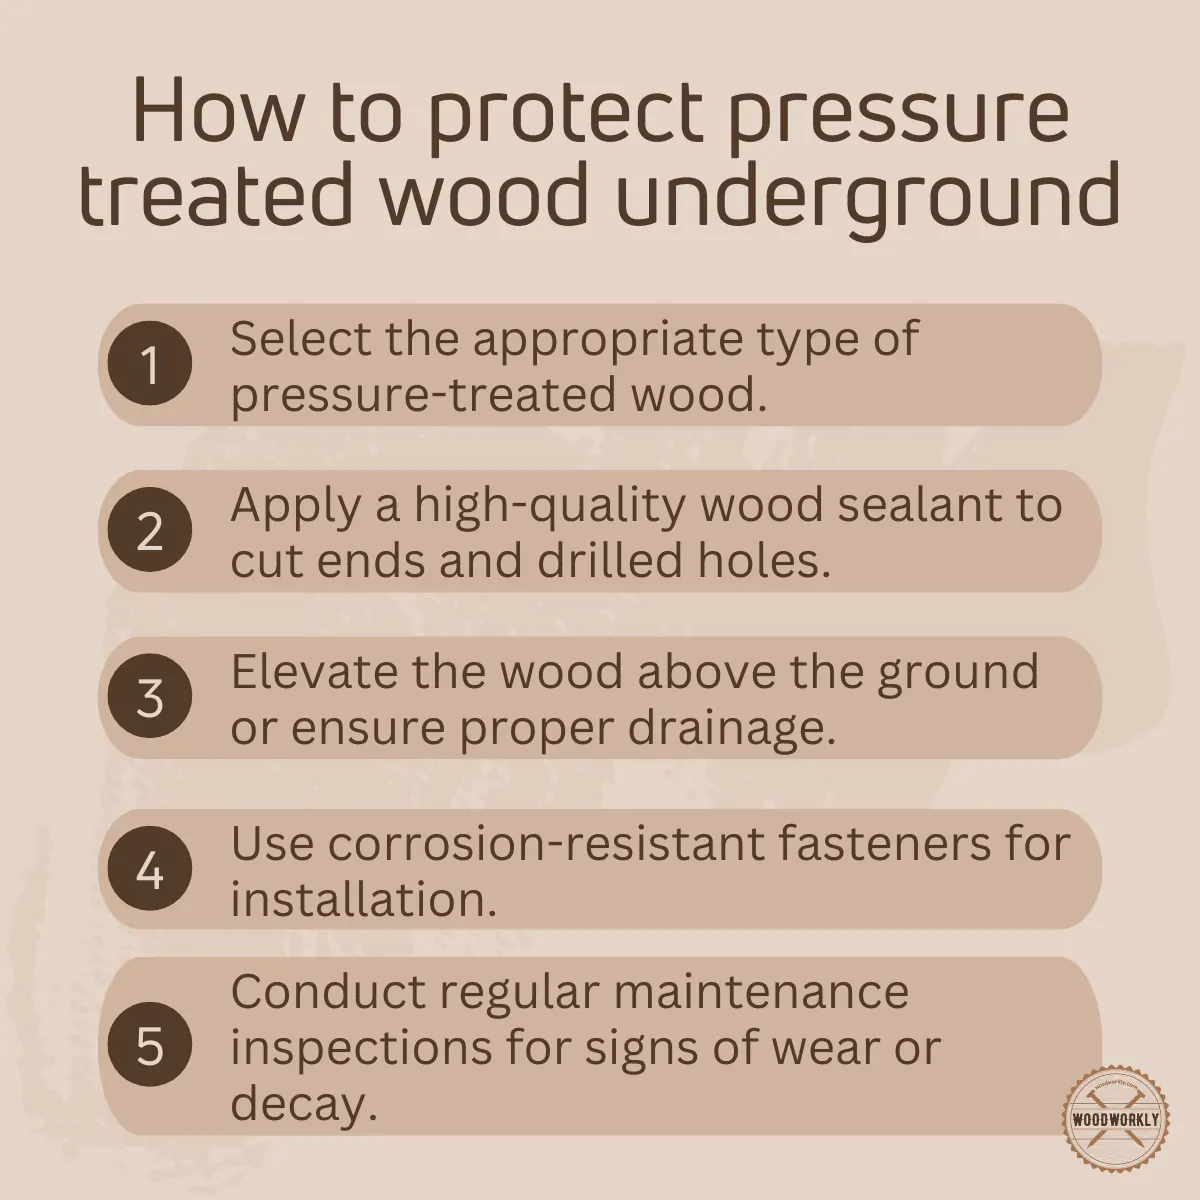 How to protect pressure treated wood underground